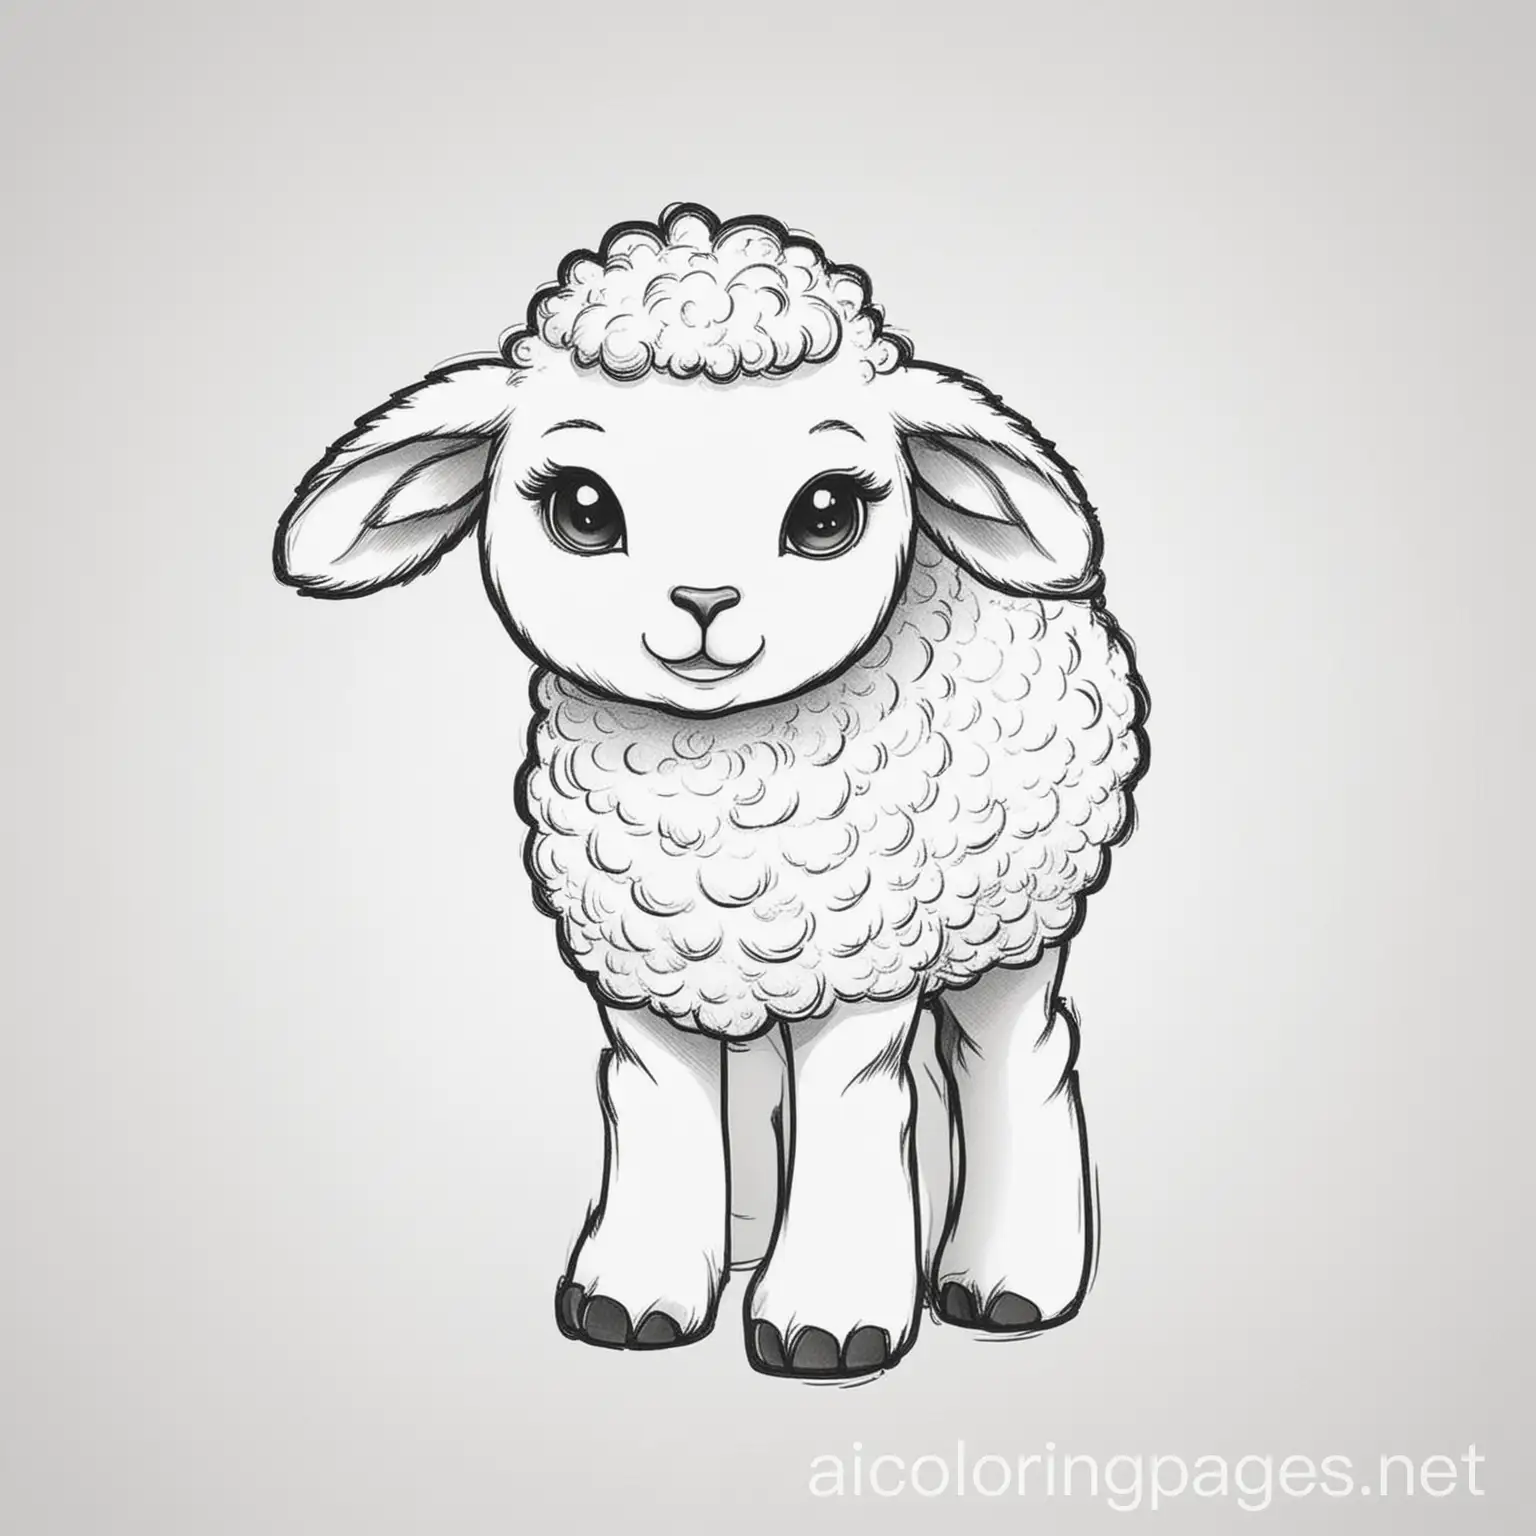 Adorable-Lamb-Coloring-Page-in-Simple-Line-Art-Style-on-White-Background